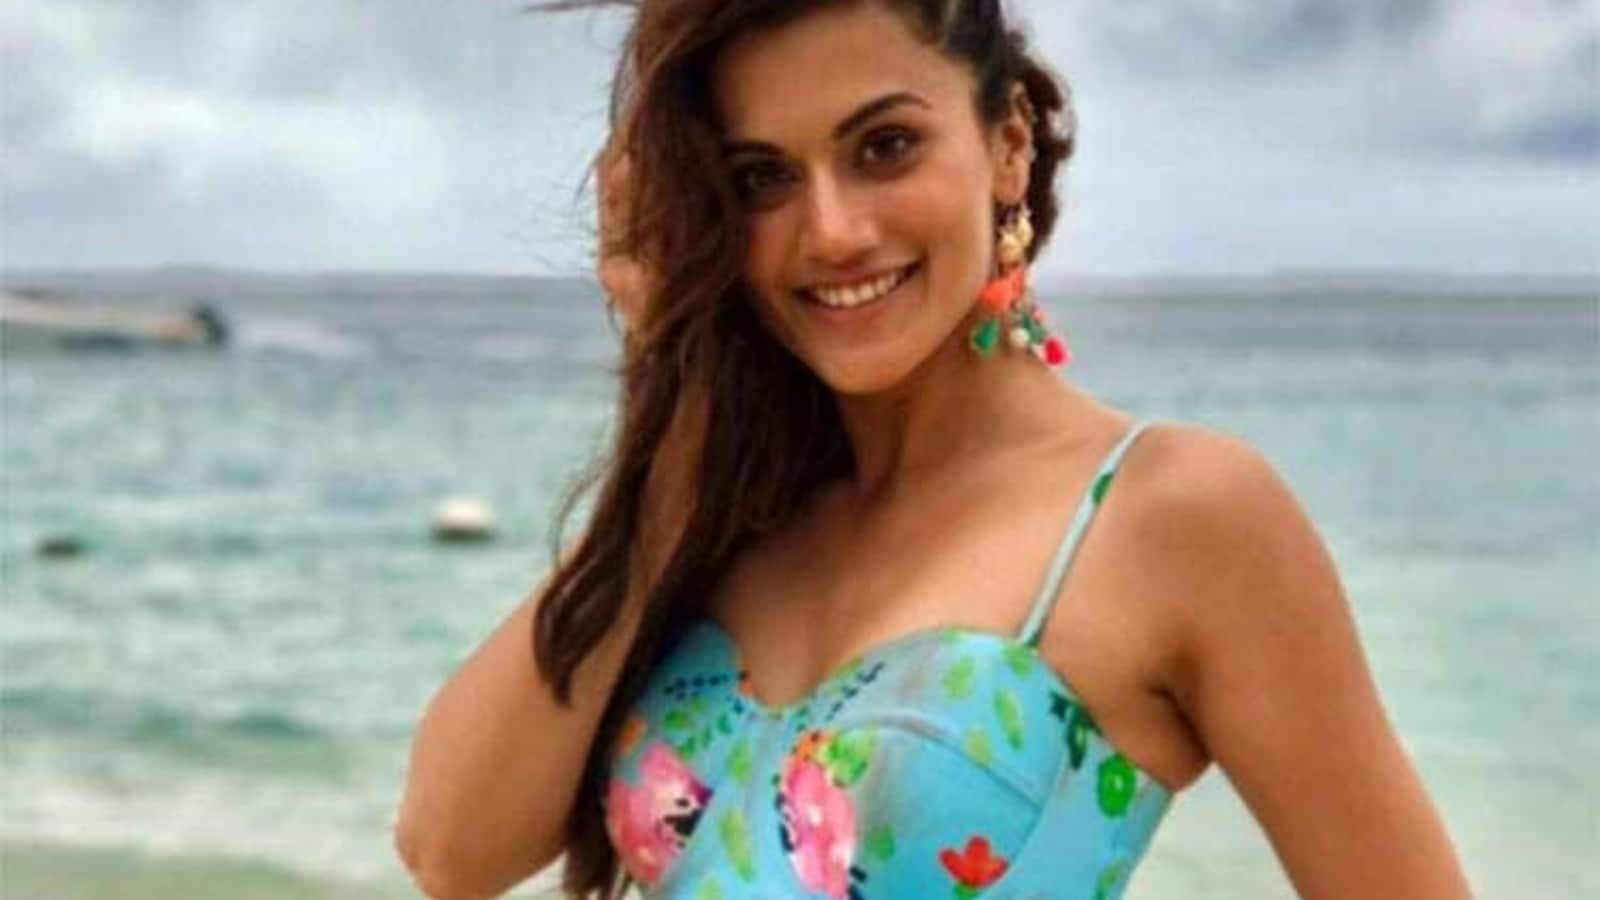 Taapsee Pannu slams trolling of women for wearing bikinis, says it 'doesn't happen when men put out half-naked pics' | Bollywood - Hindustan Times